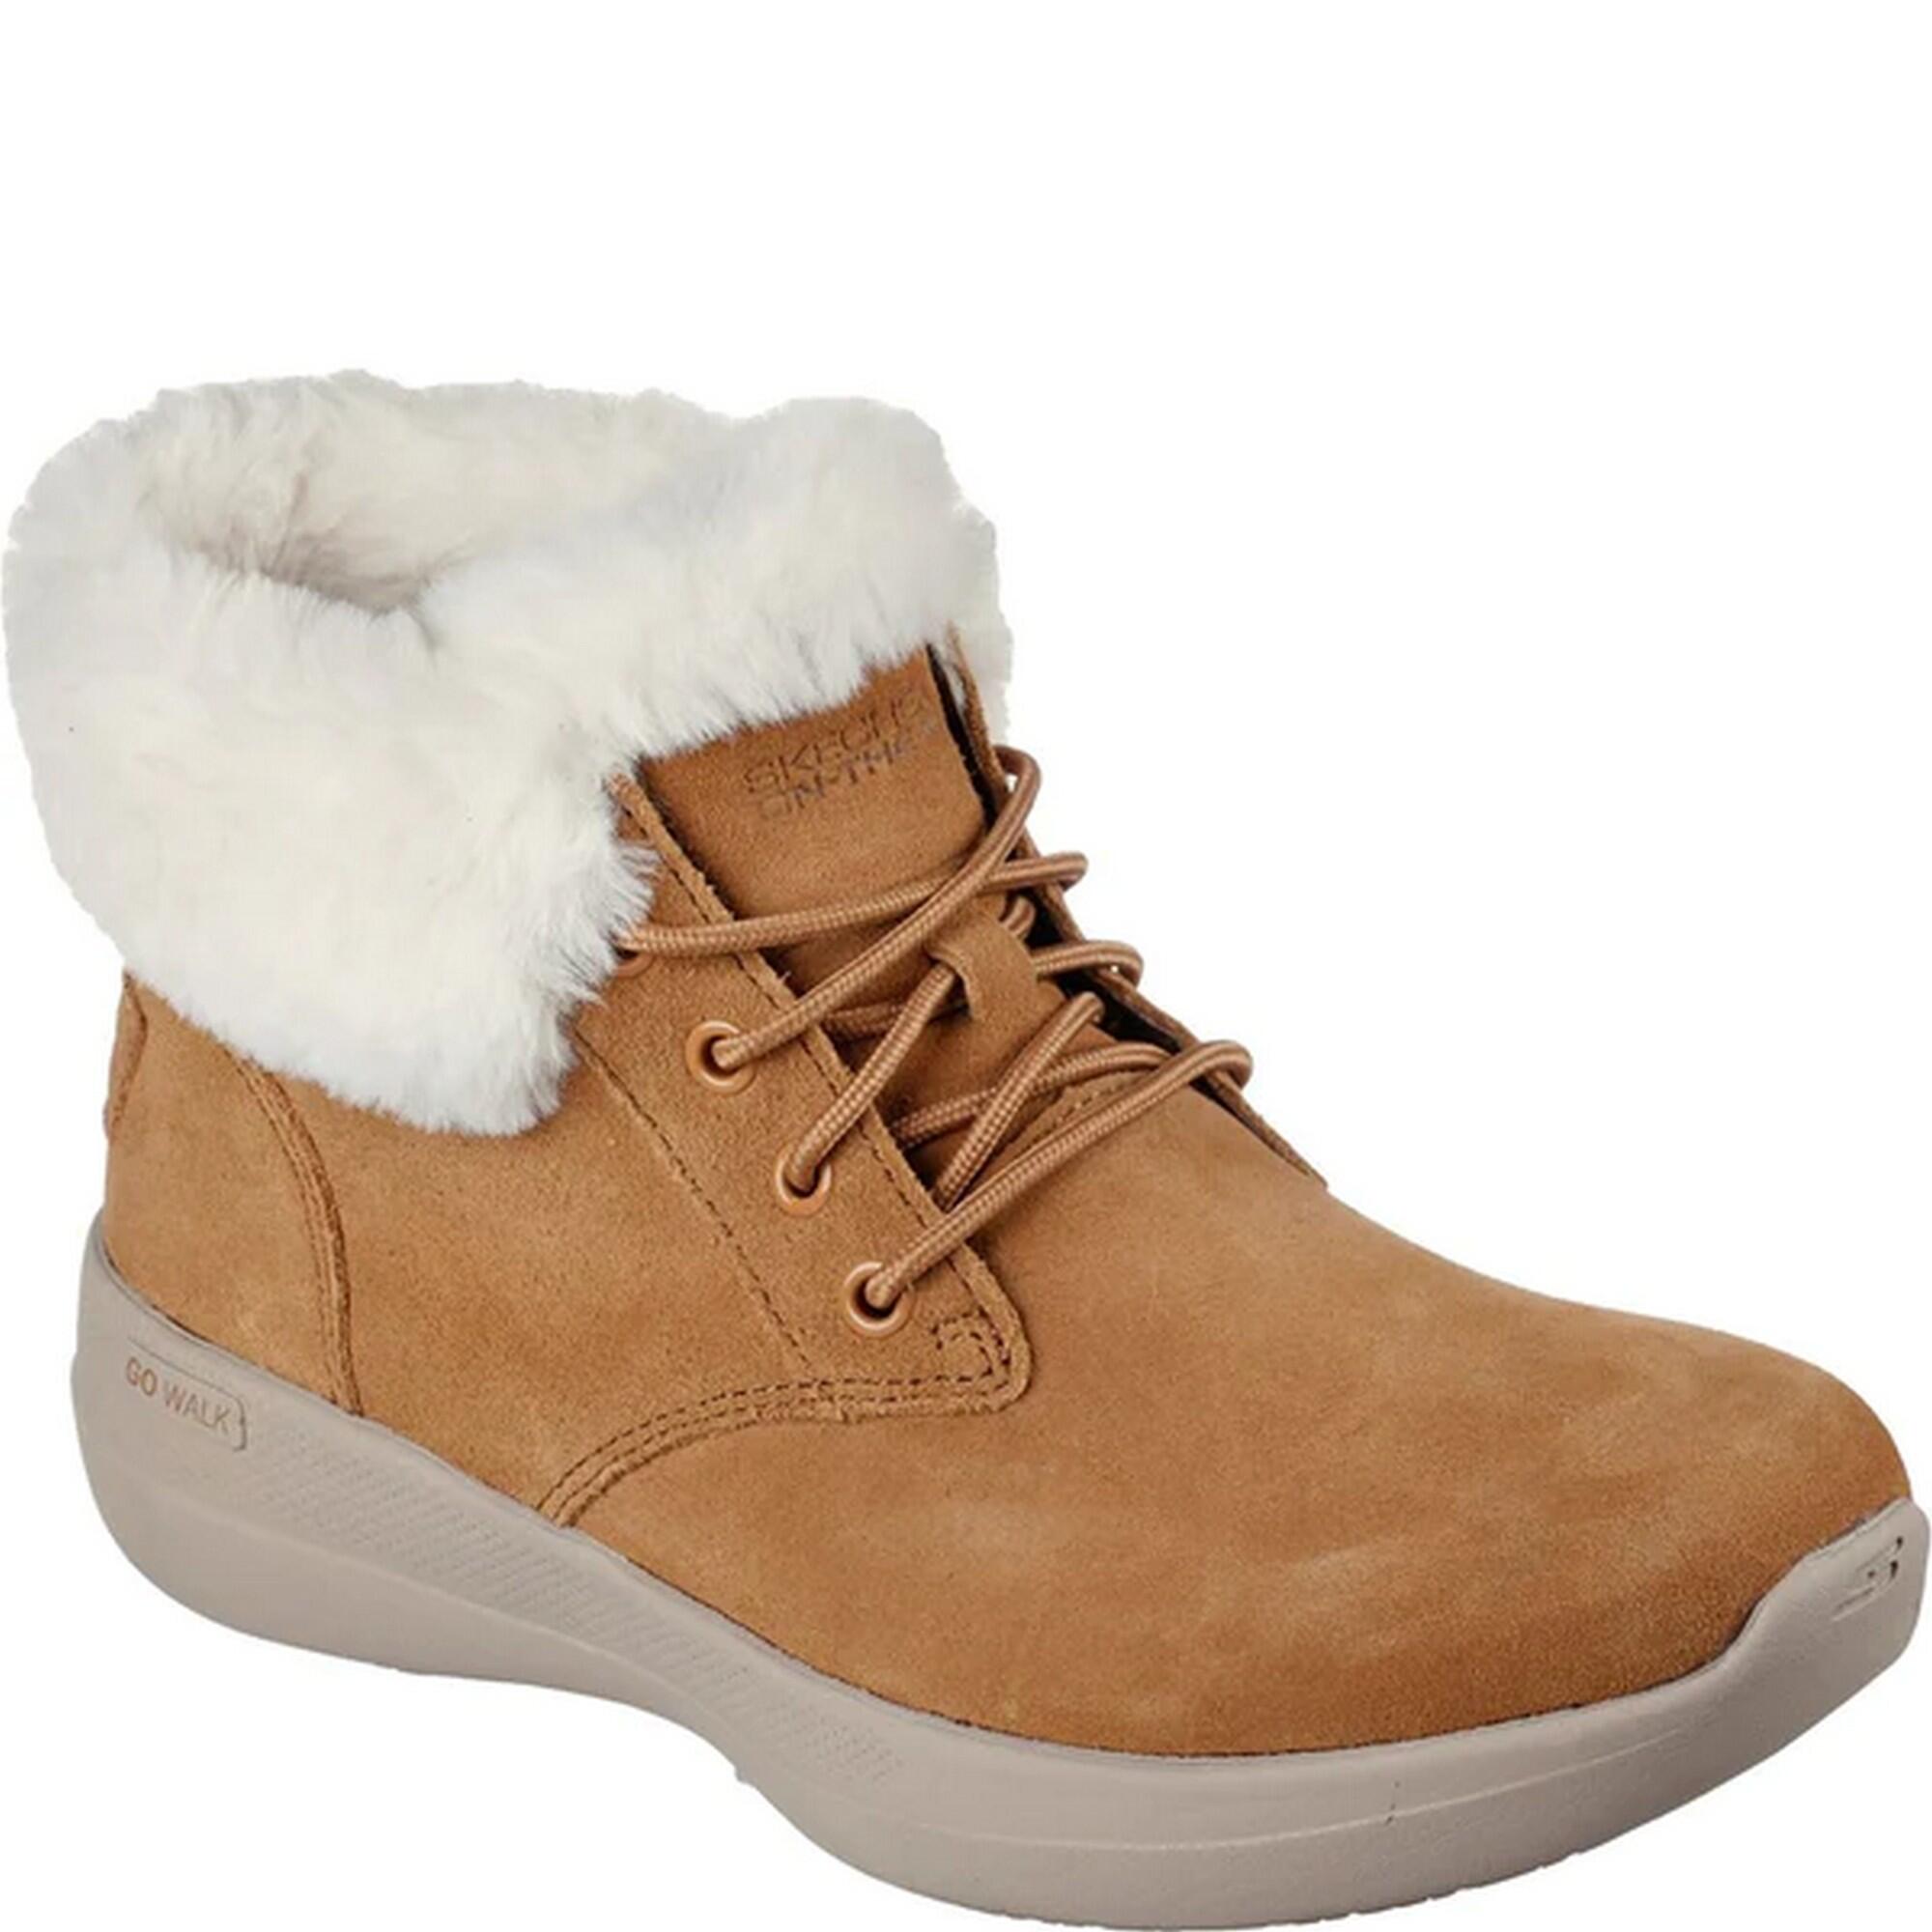 Womens/Ladies Go Walk Stability Comfy Days Suede Ankle Boots (Chestnut) 3/5